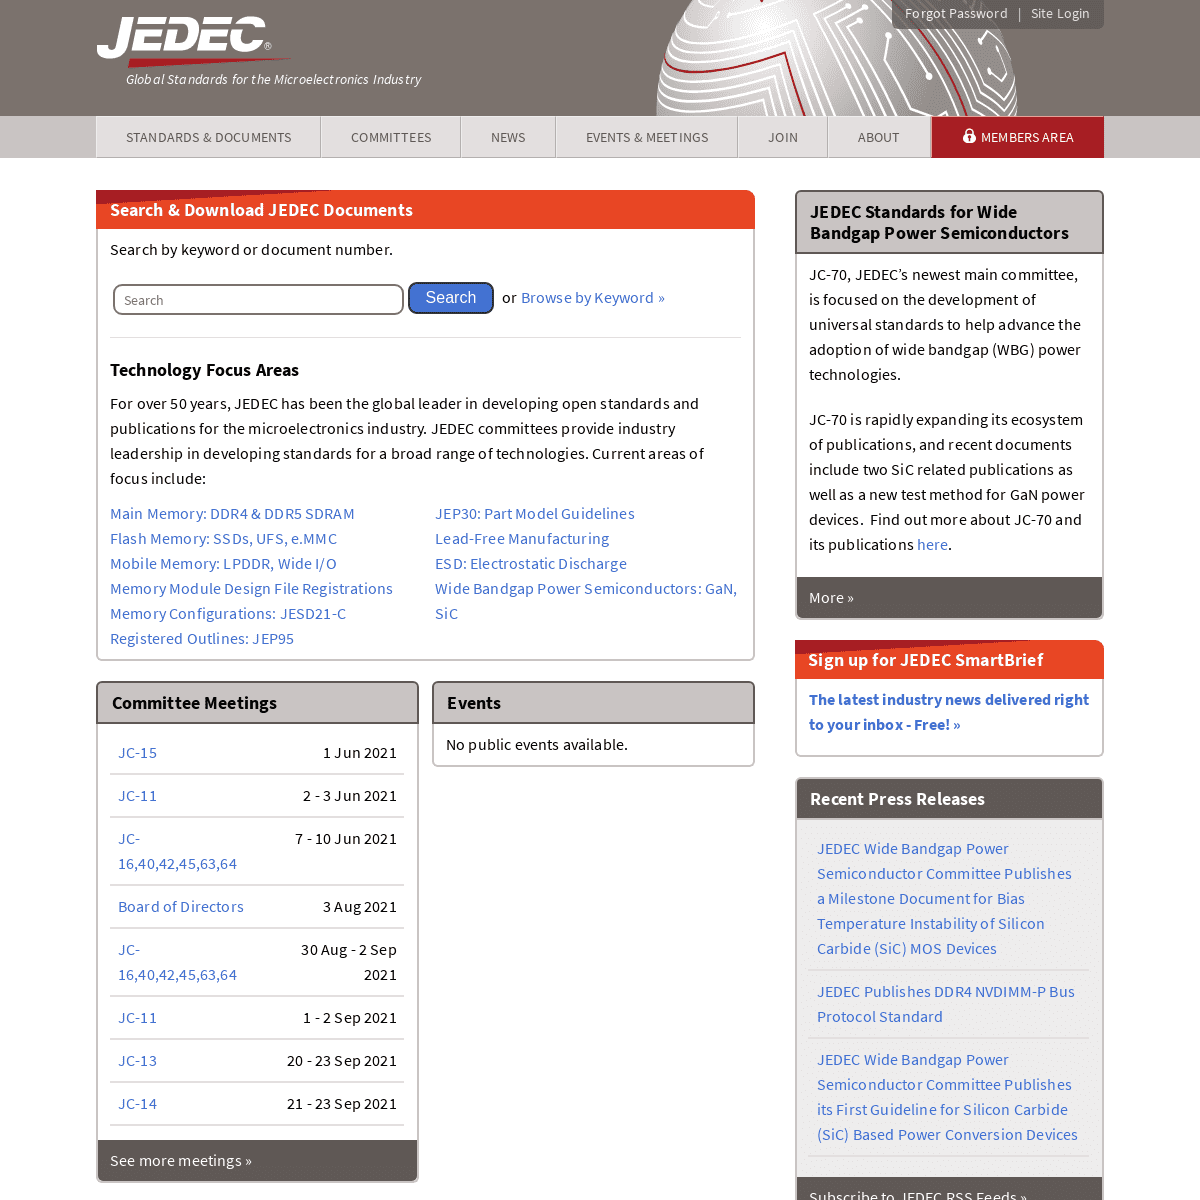 A complete backup of https://jedec.org